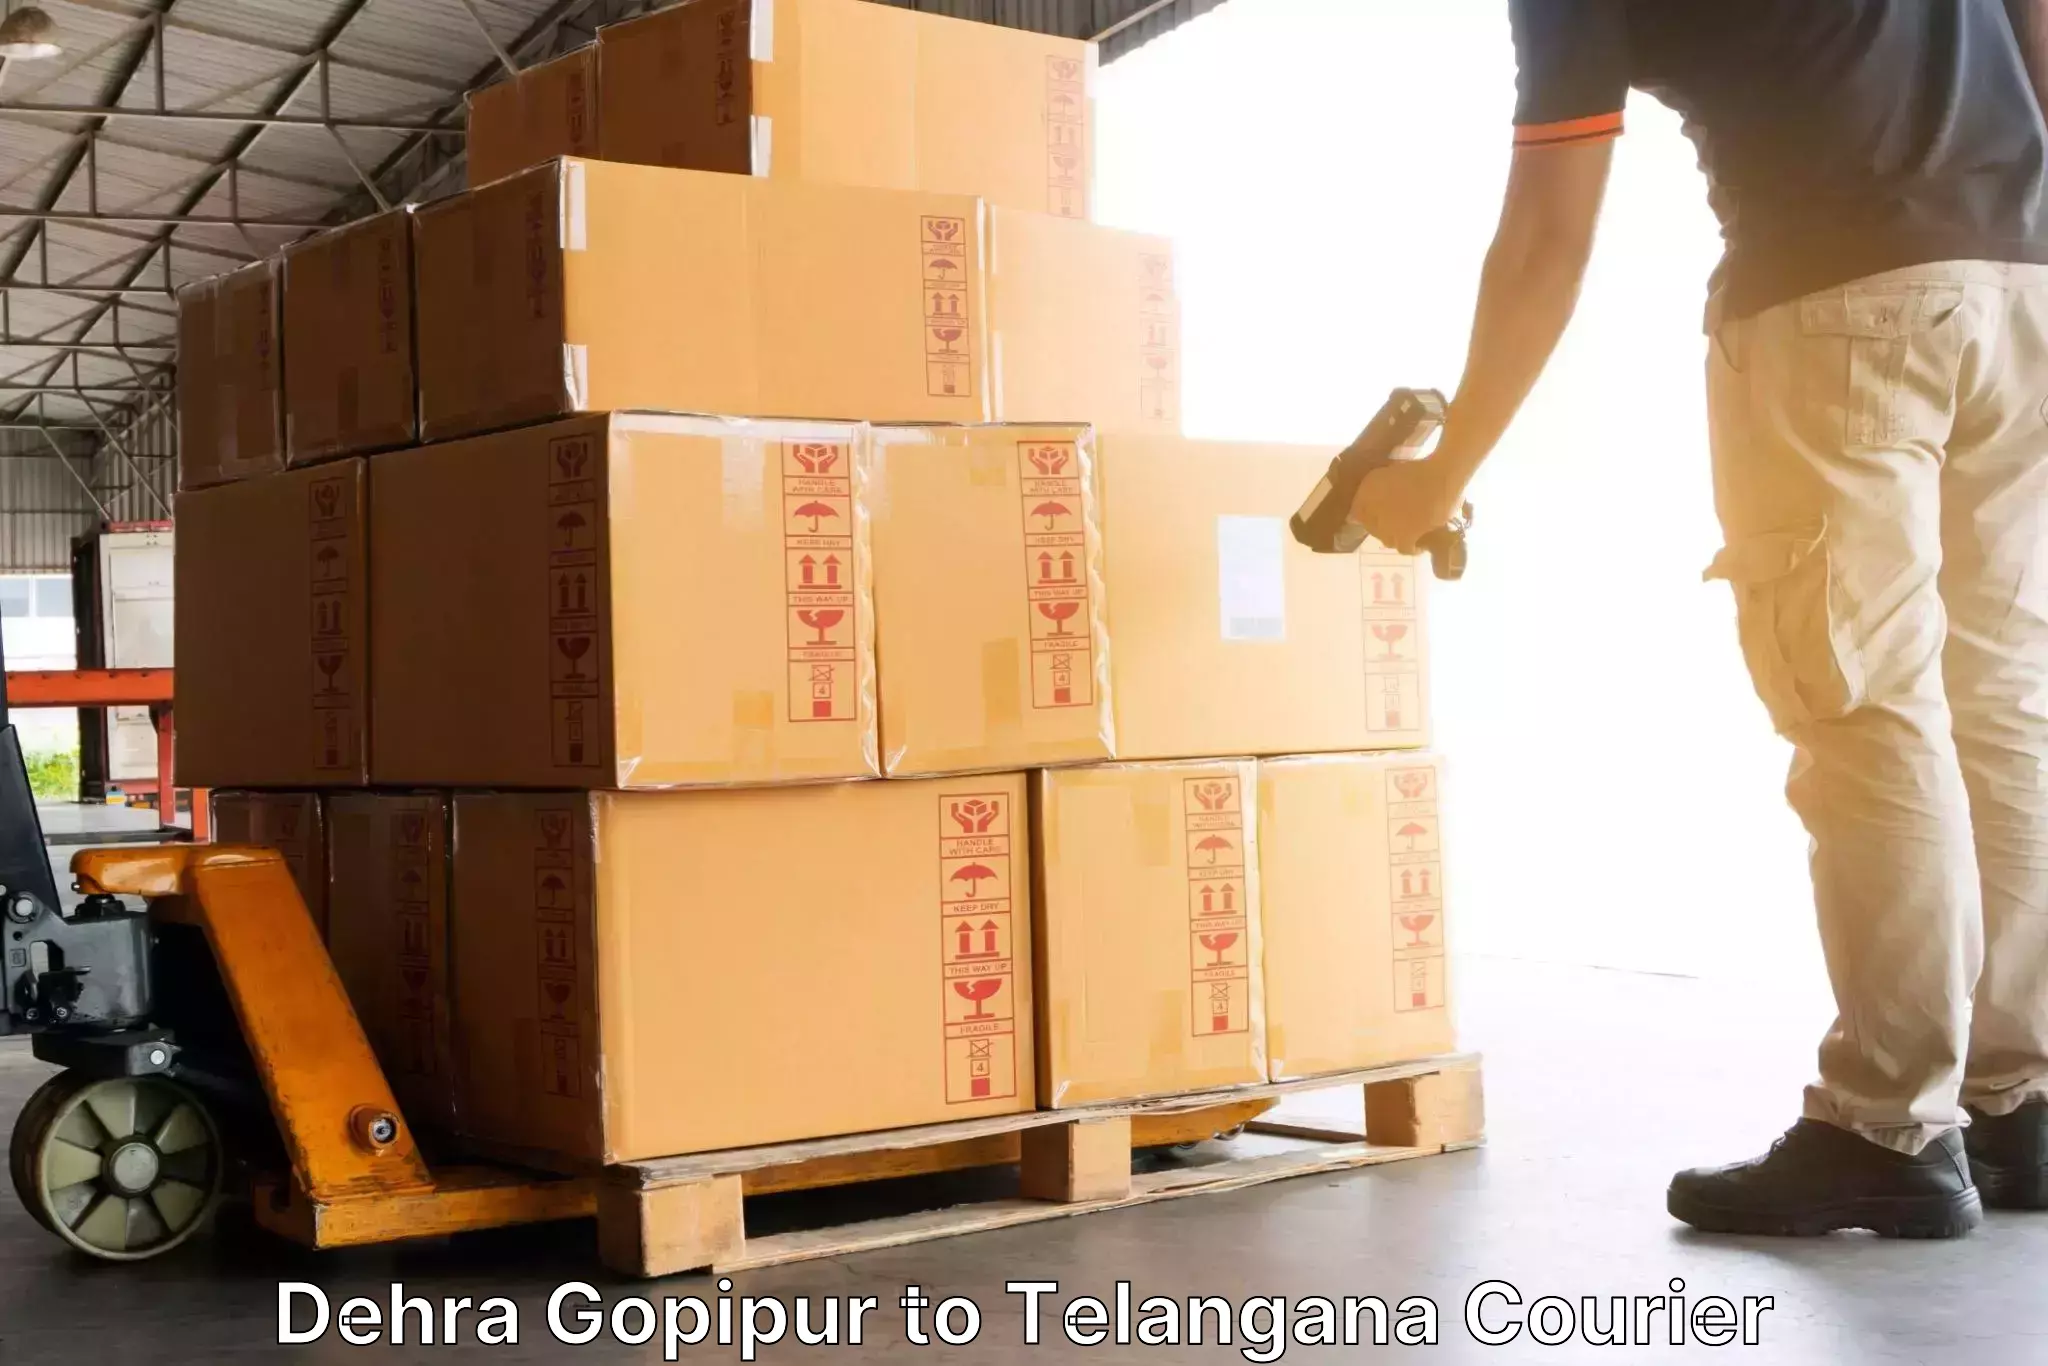 State-of-the-art courier technology Dehra Gopipur to Zaheerabad